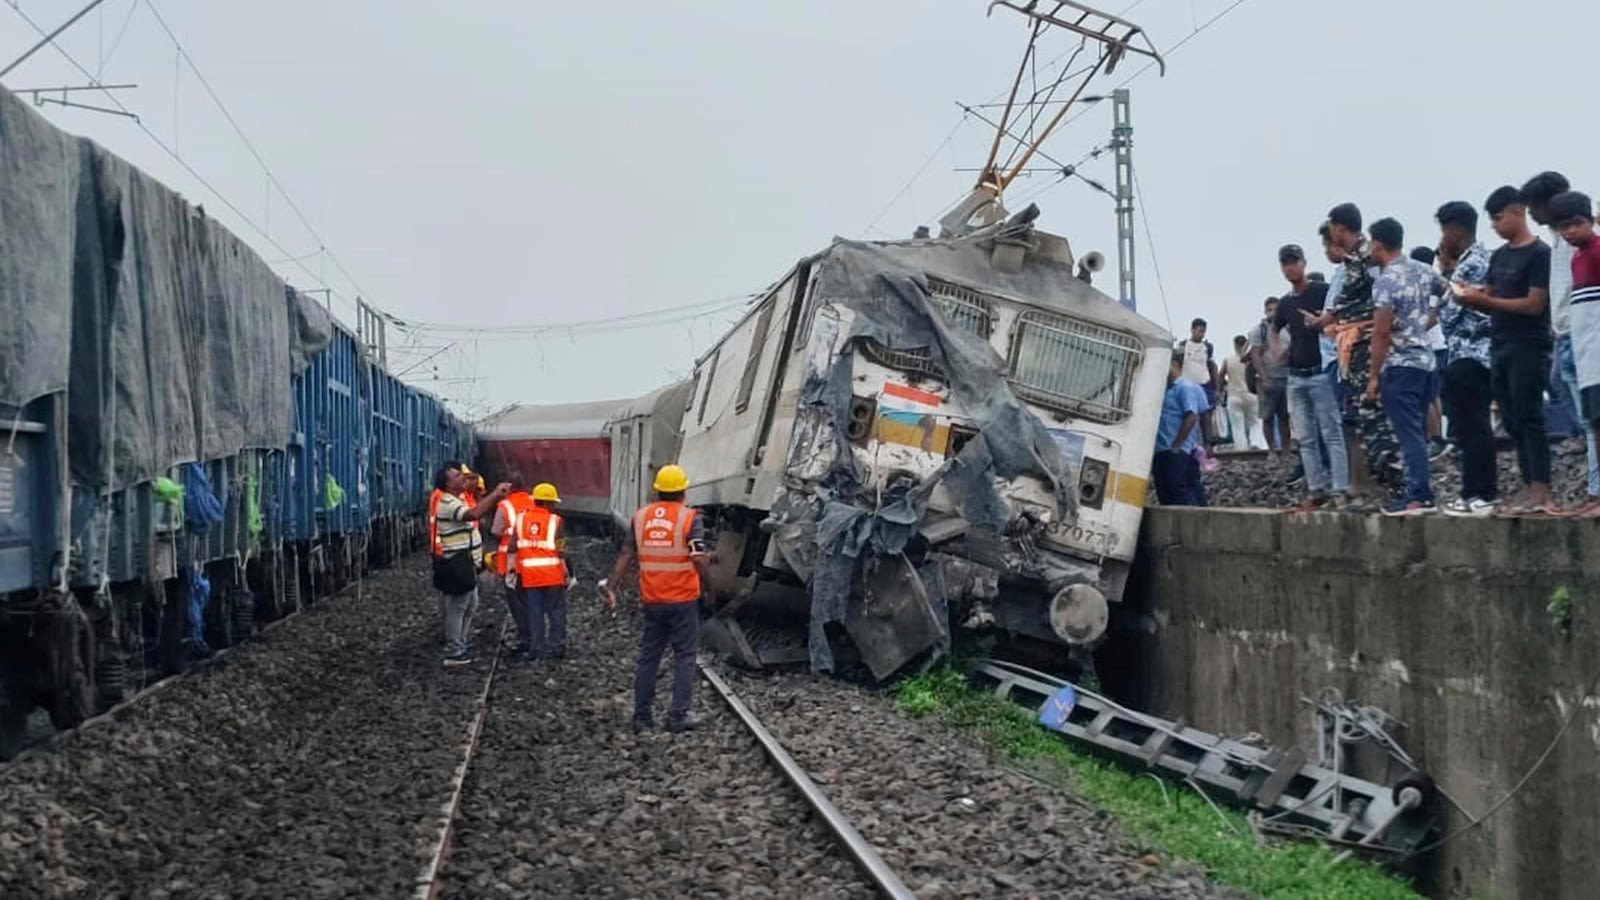 Passenger train derails in India, killing 2 passengers and injuring 20 others